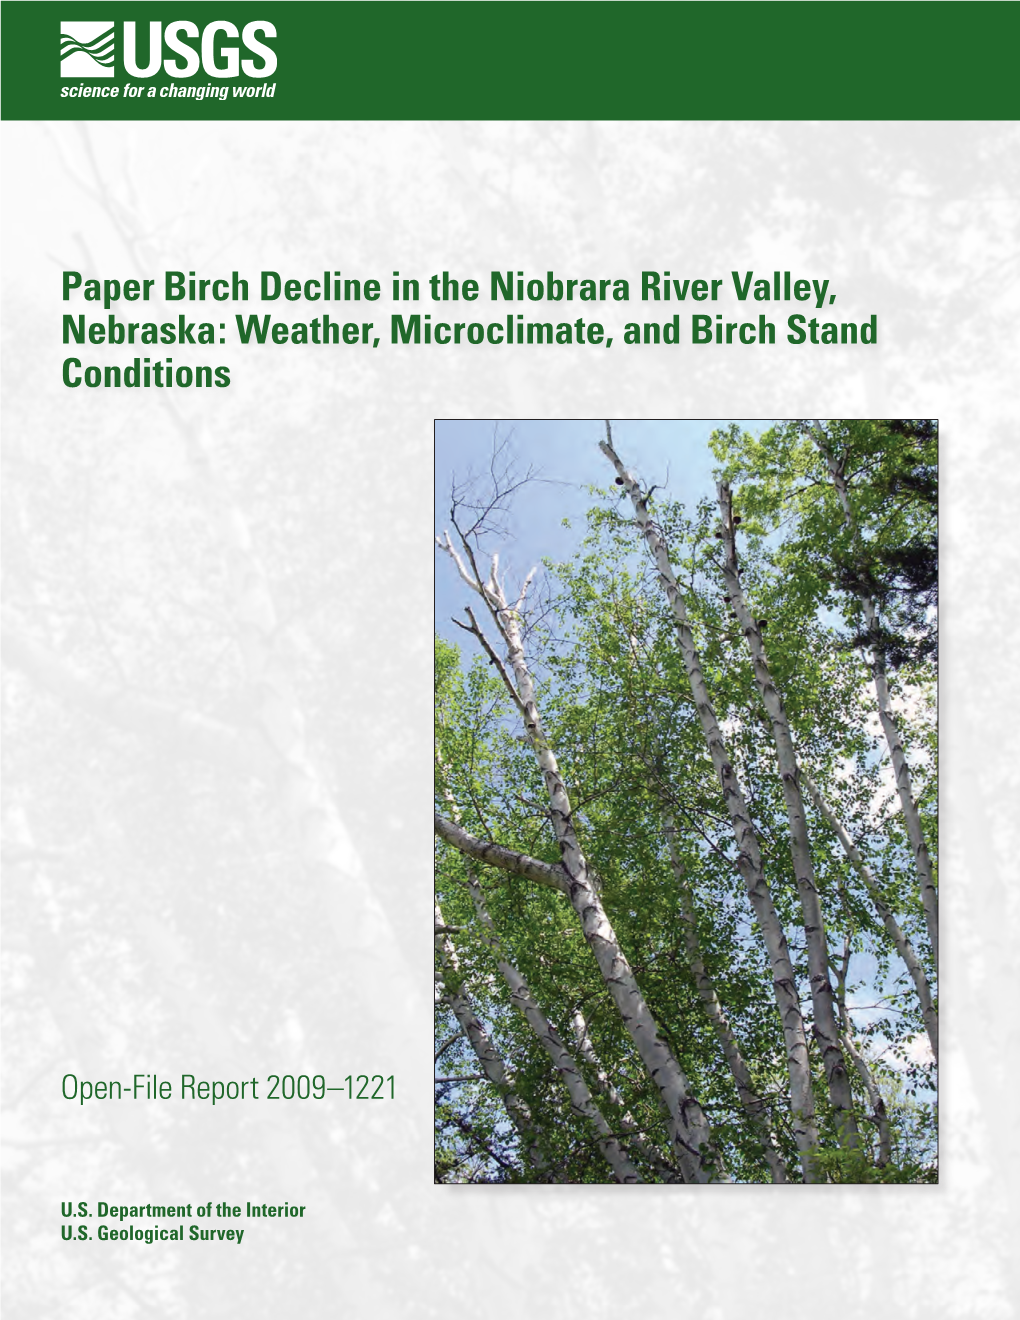 Paper Birch Decline in the Niobrara River Valley, Nebraska: Weather, Microclimate, and Birch Stand Conditions